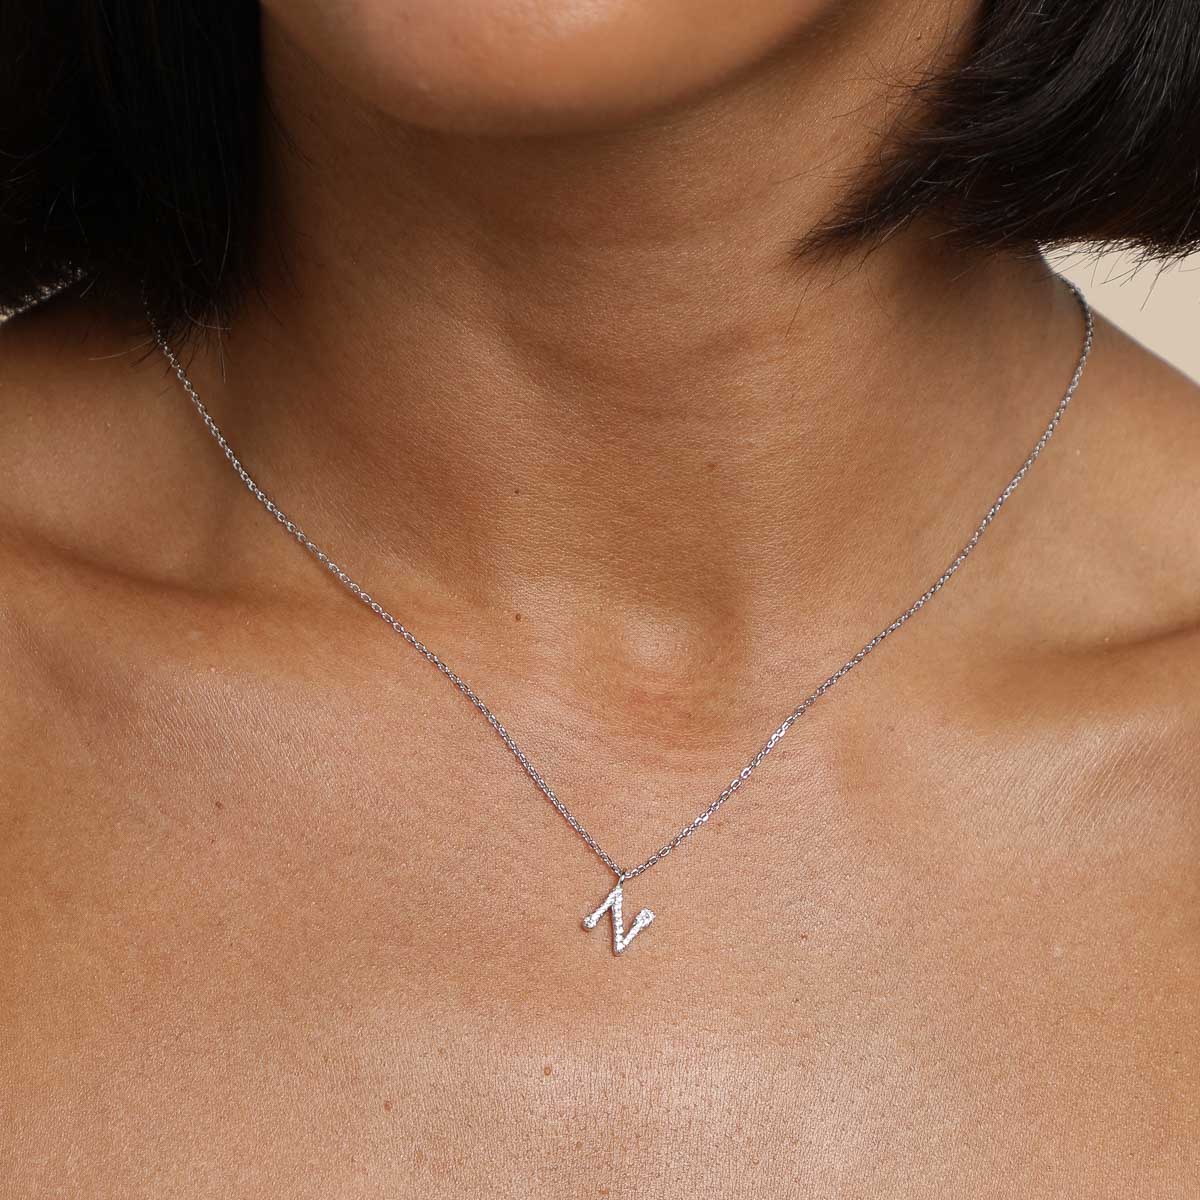 N Initial Pavé Pendant Necklace in Silver